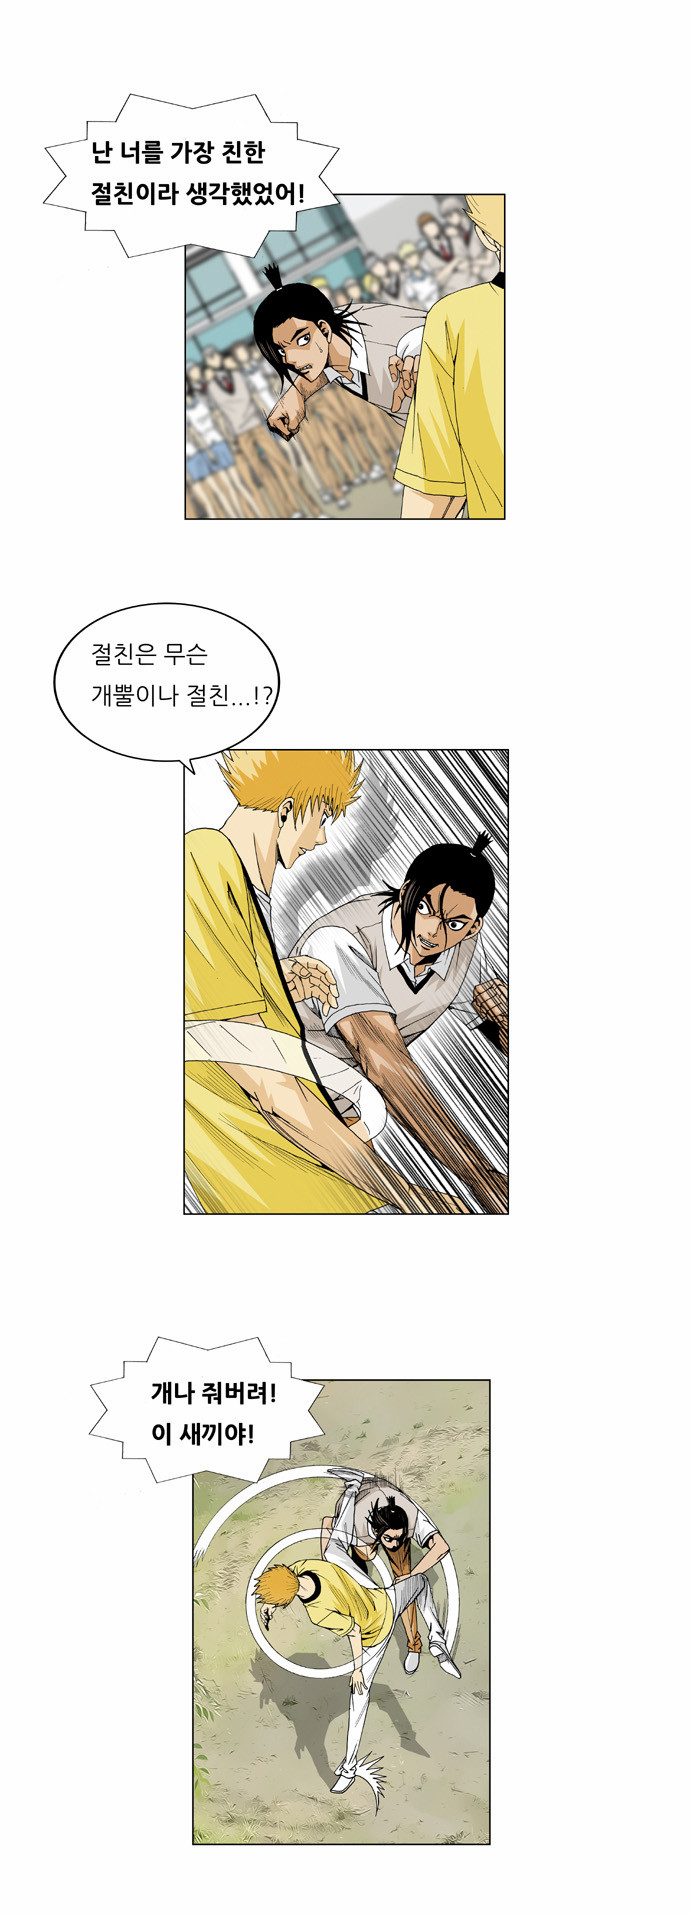 Ultimate Legend - Kang Hae Hyo - Chapter 33 - Page 4